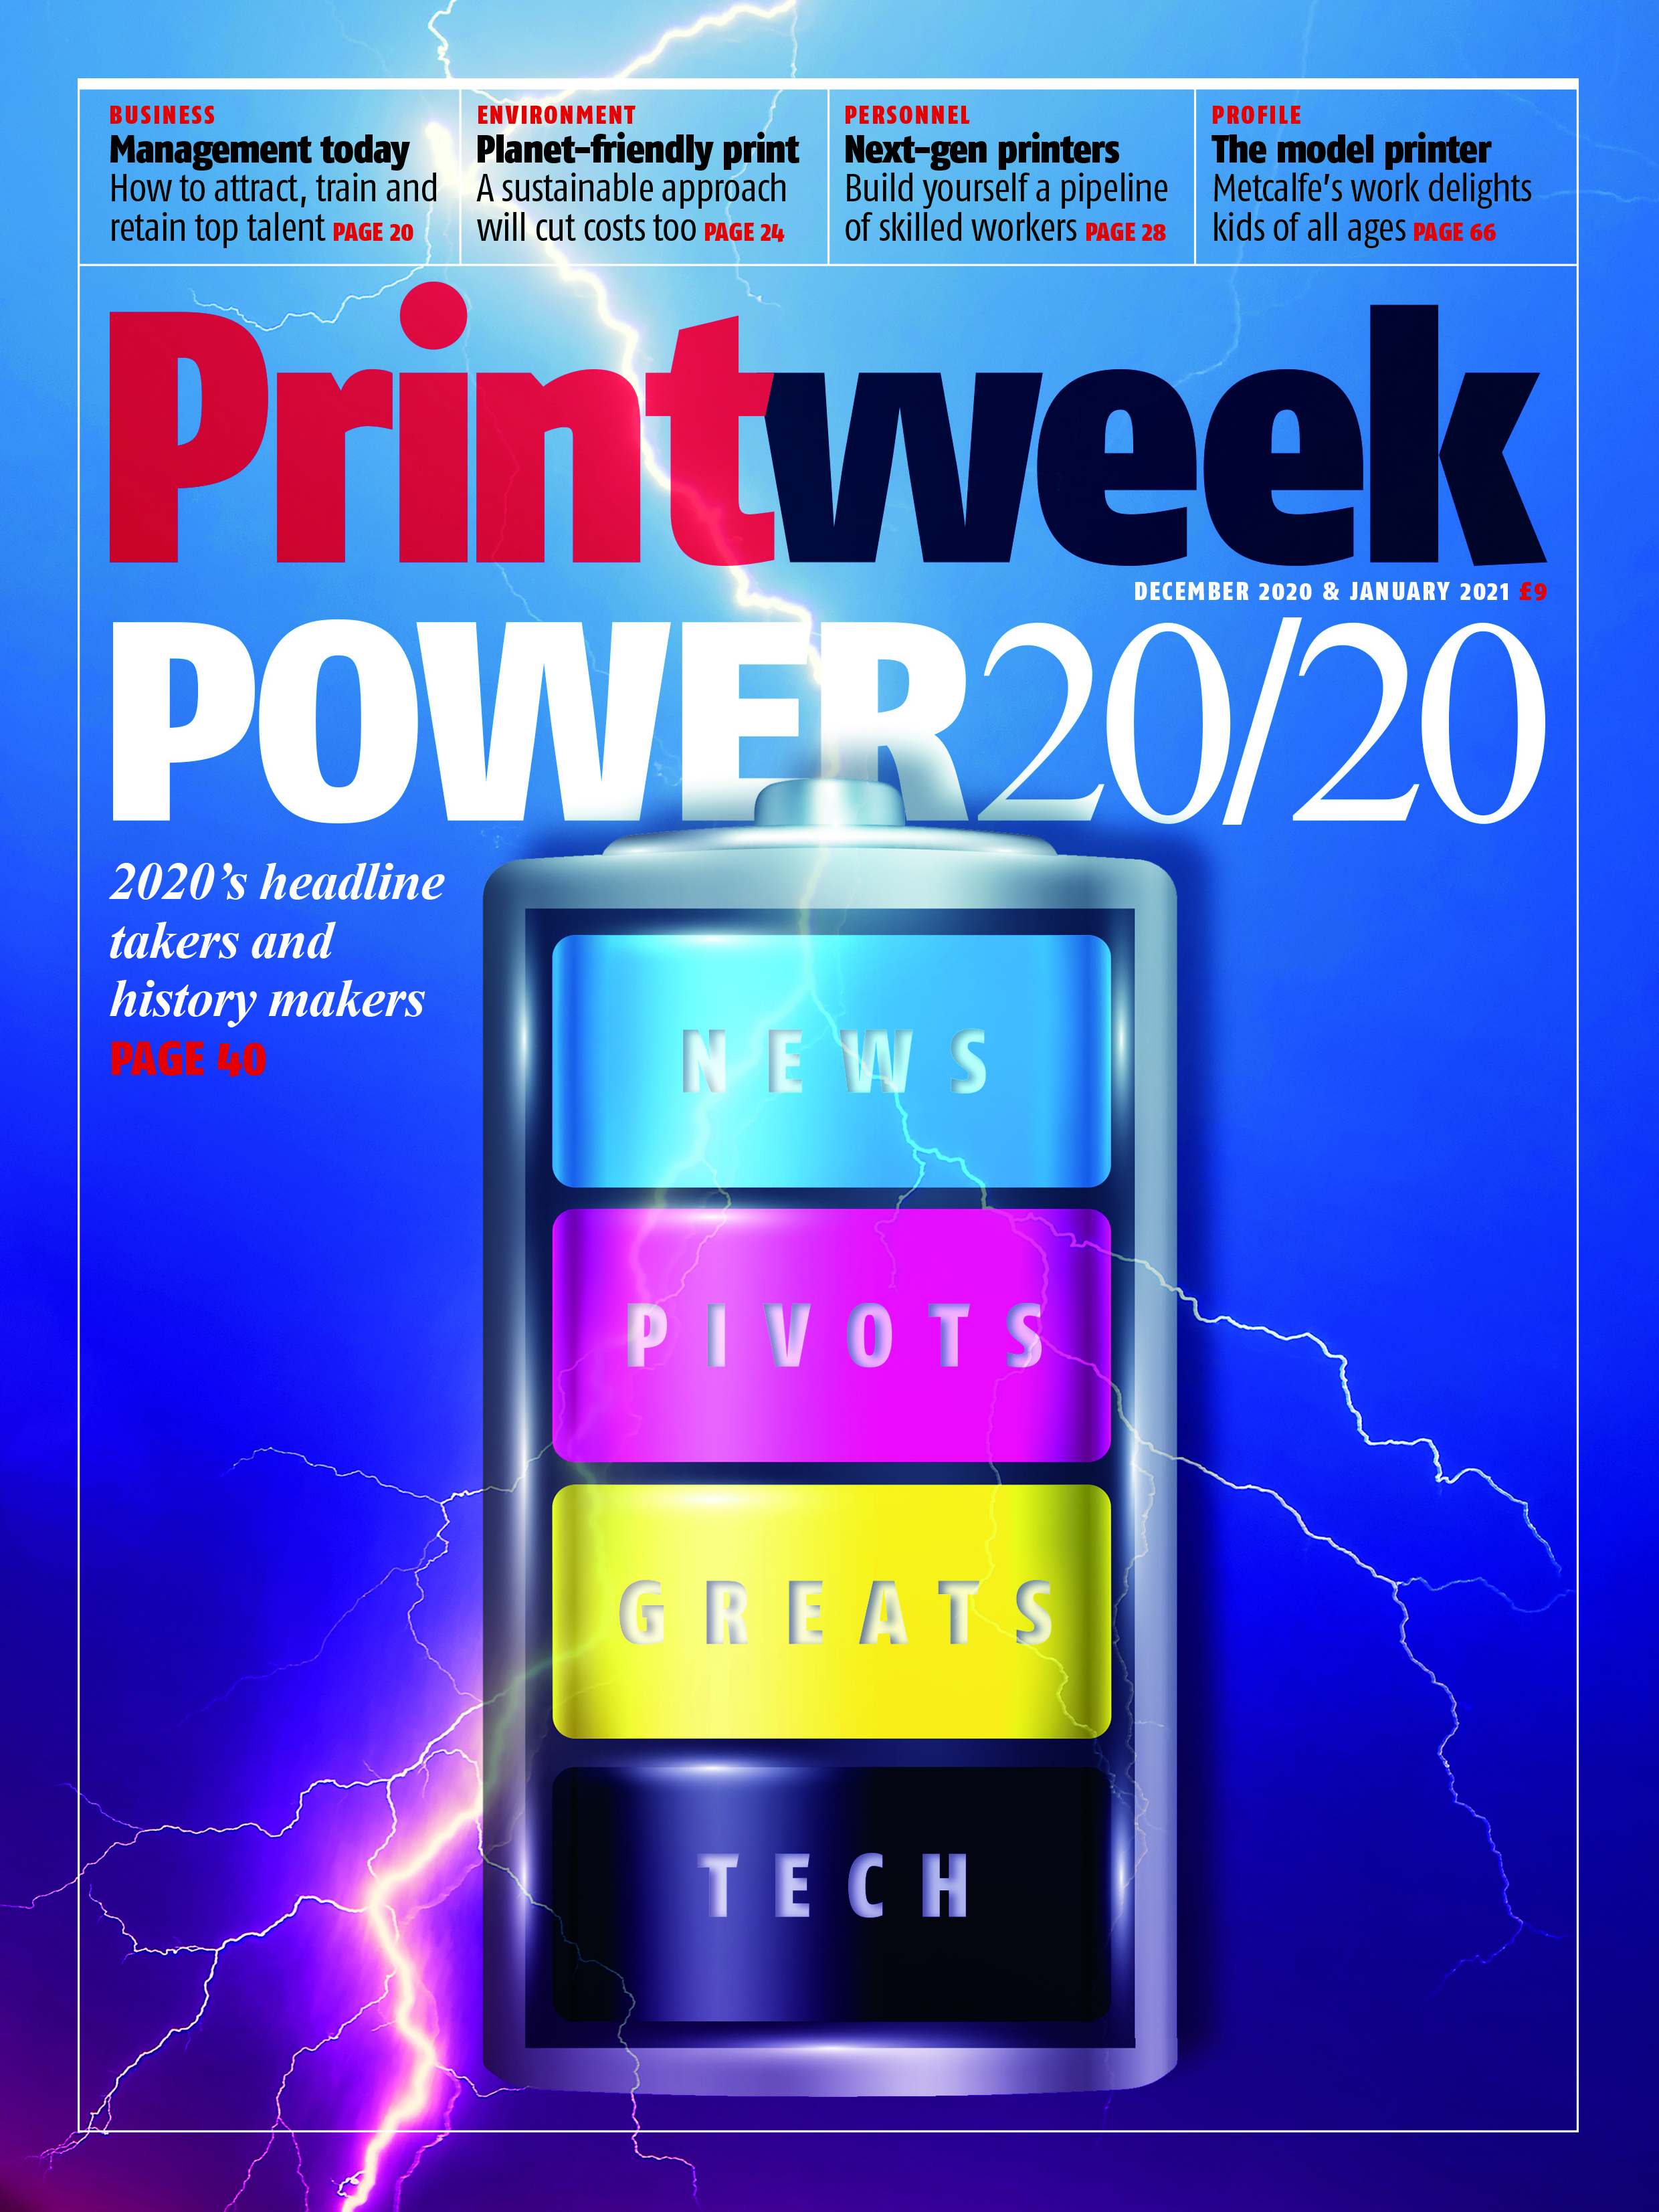 001_pw_1220_cover.jpg